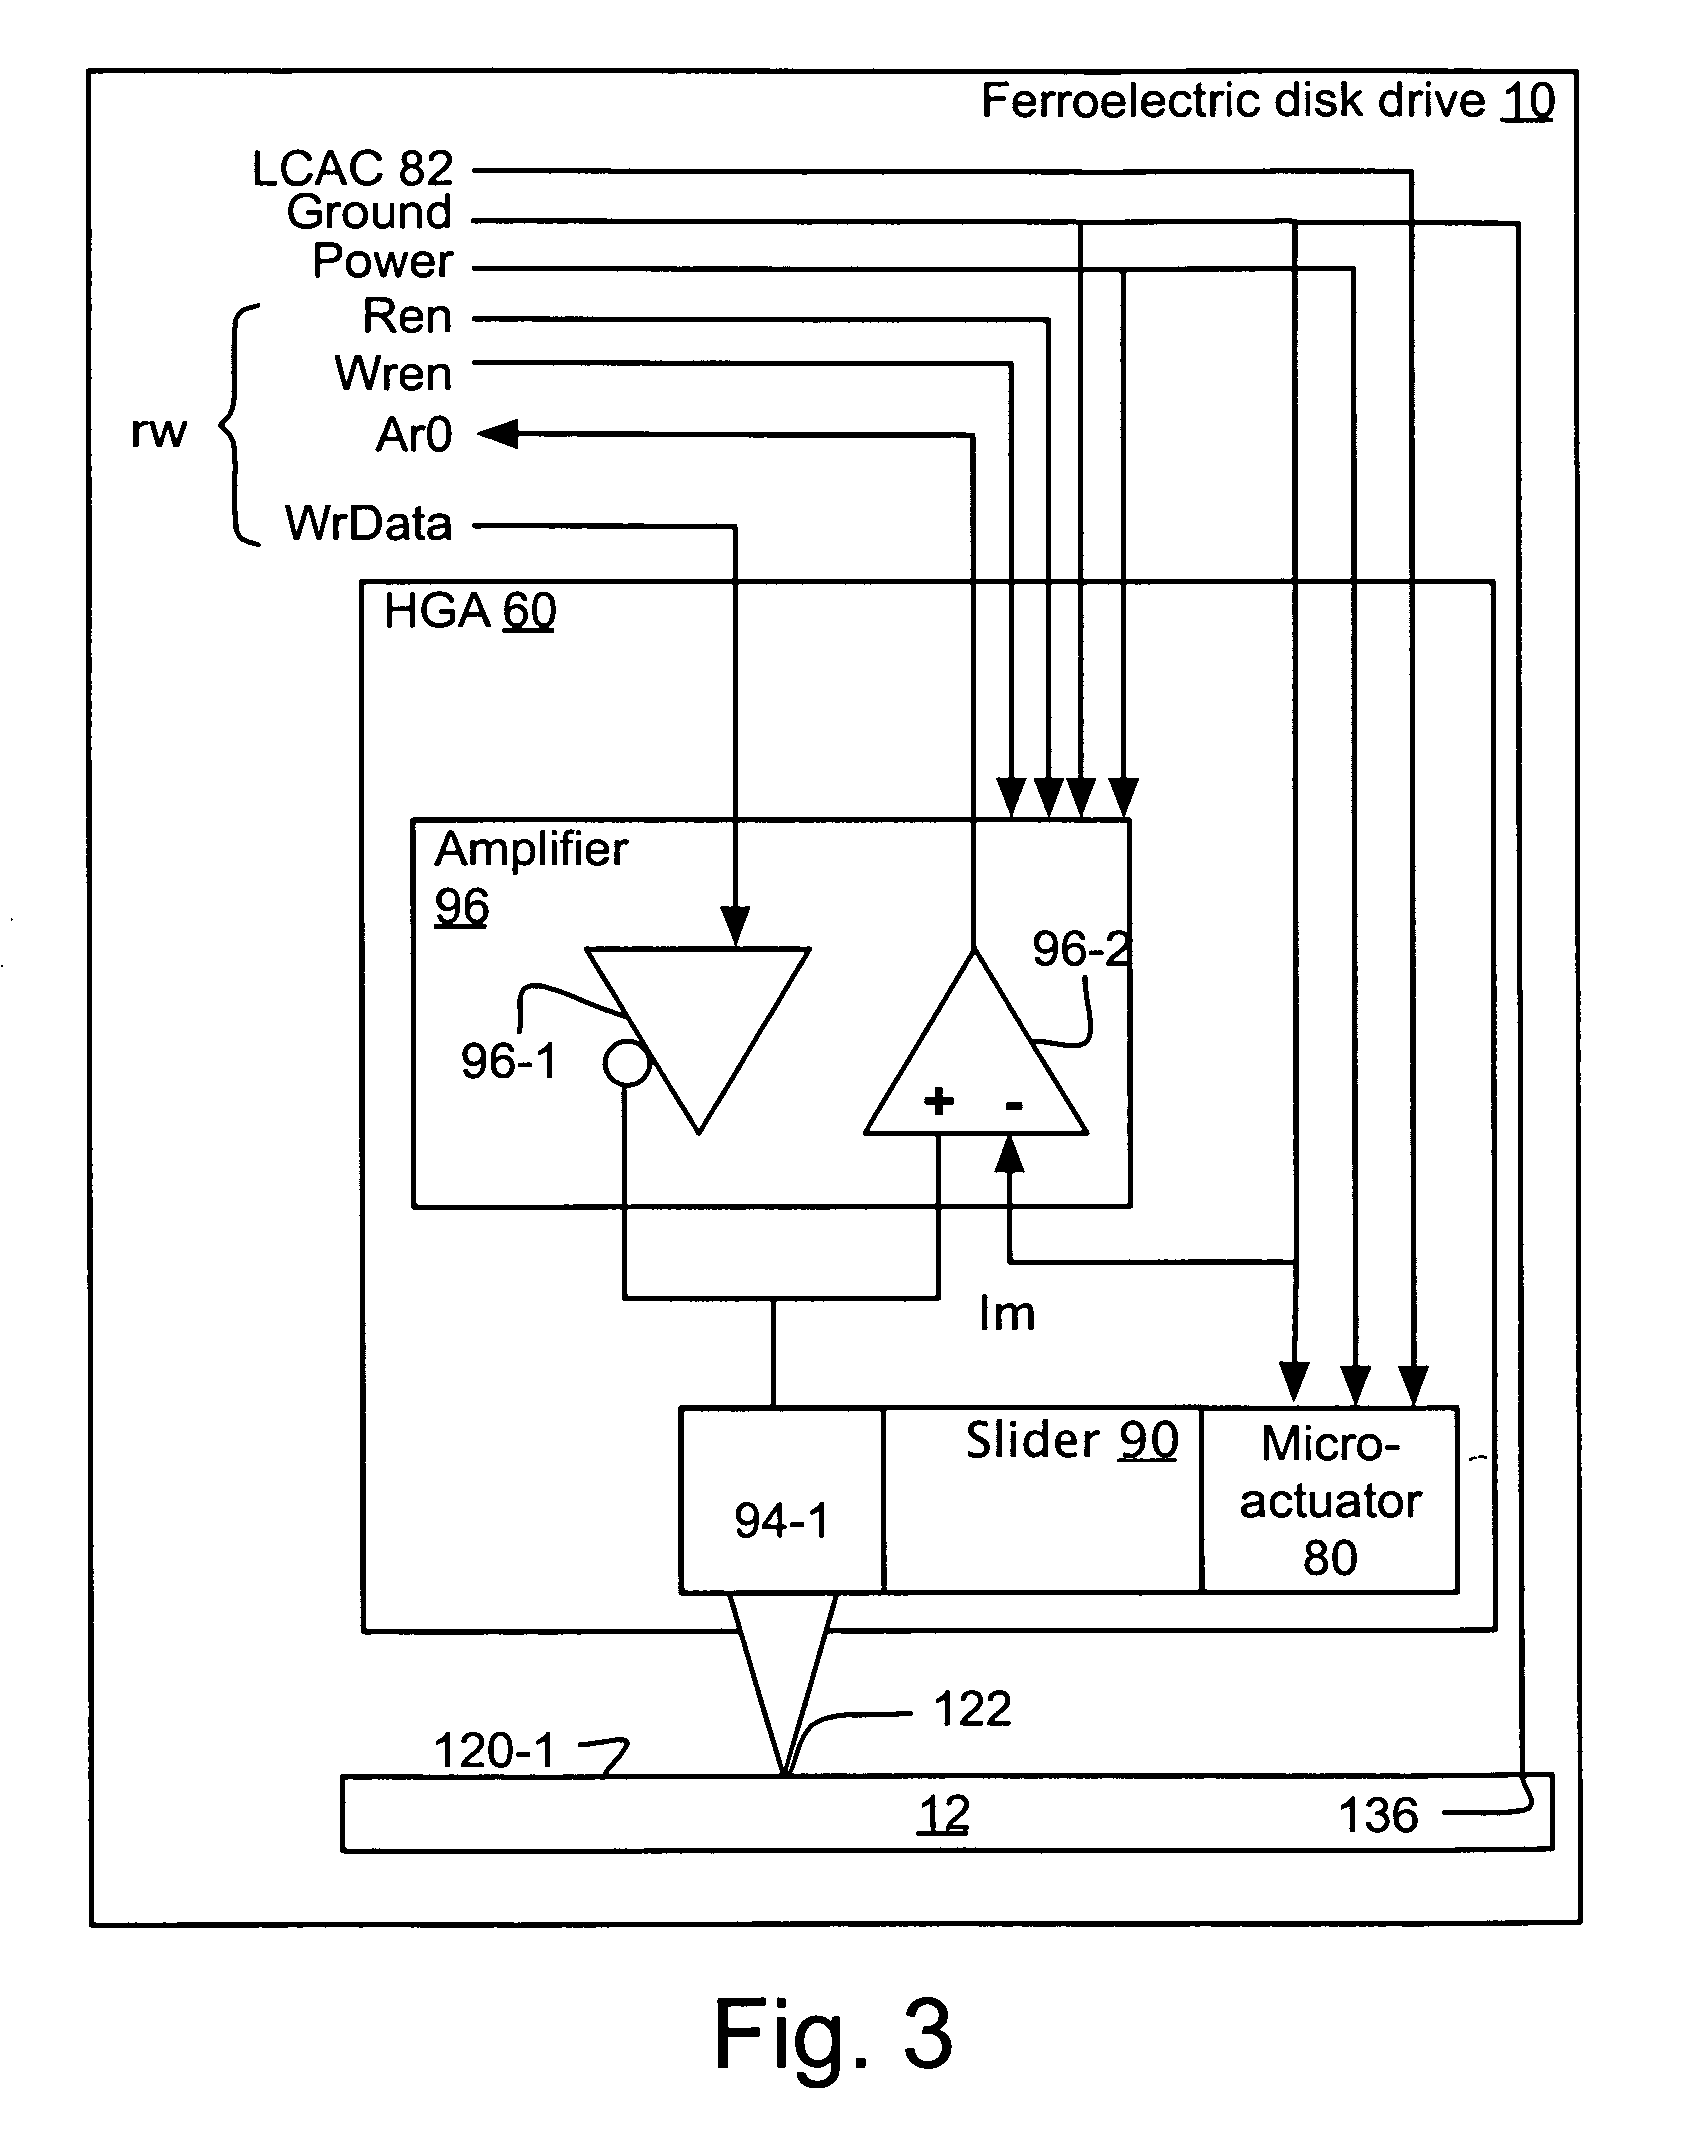 Apparatus and method for a ferroelectric disk, slider, head gimbal, actuator assemblies, and ferroelectric disk drive